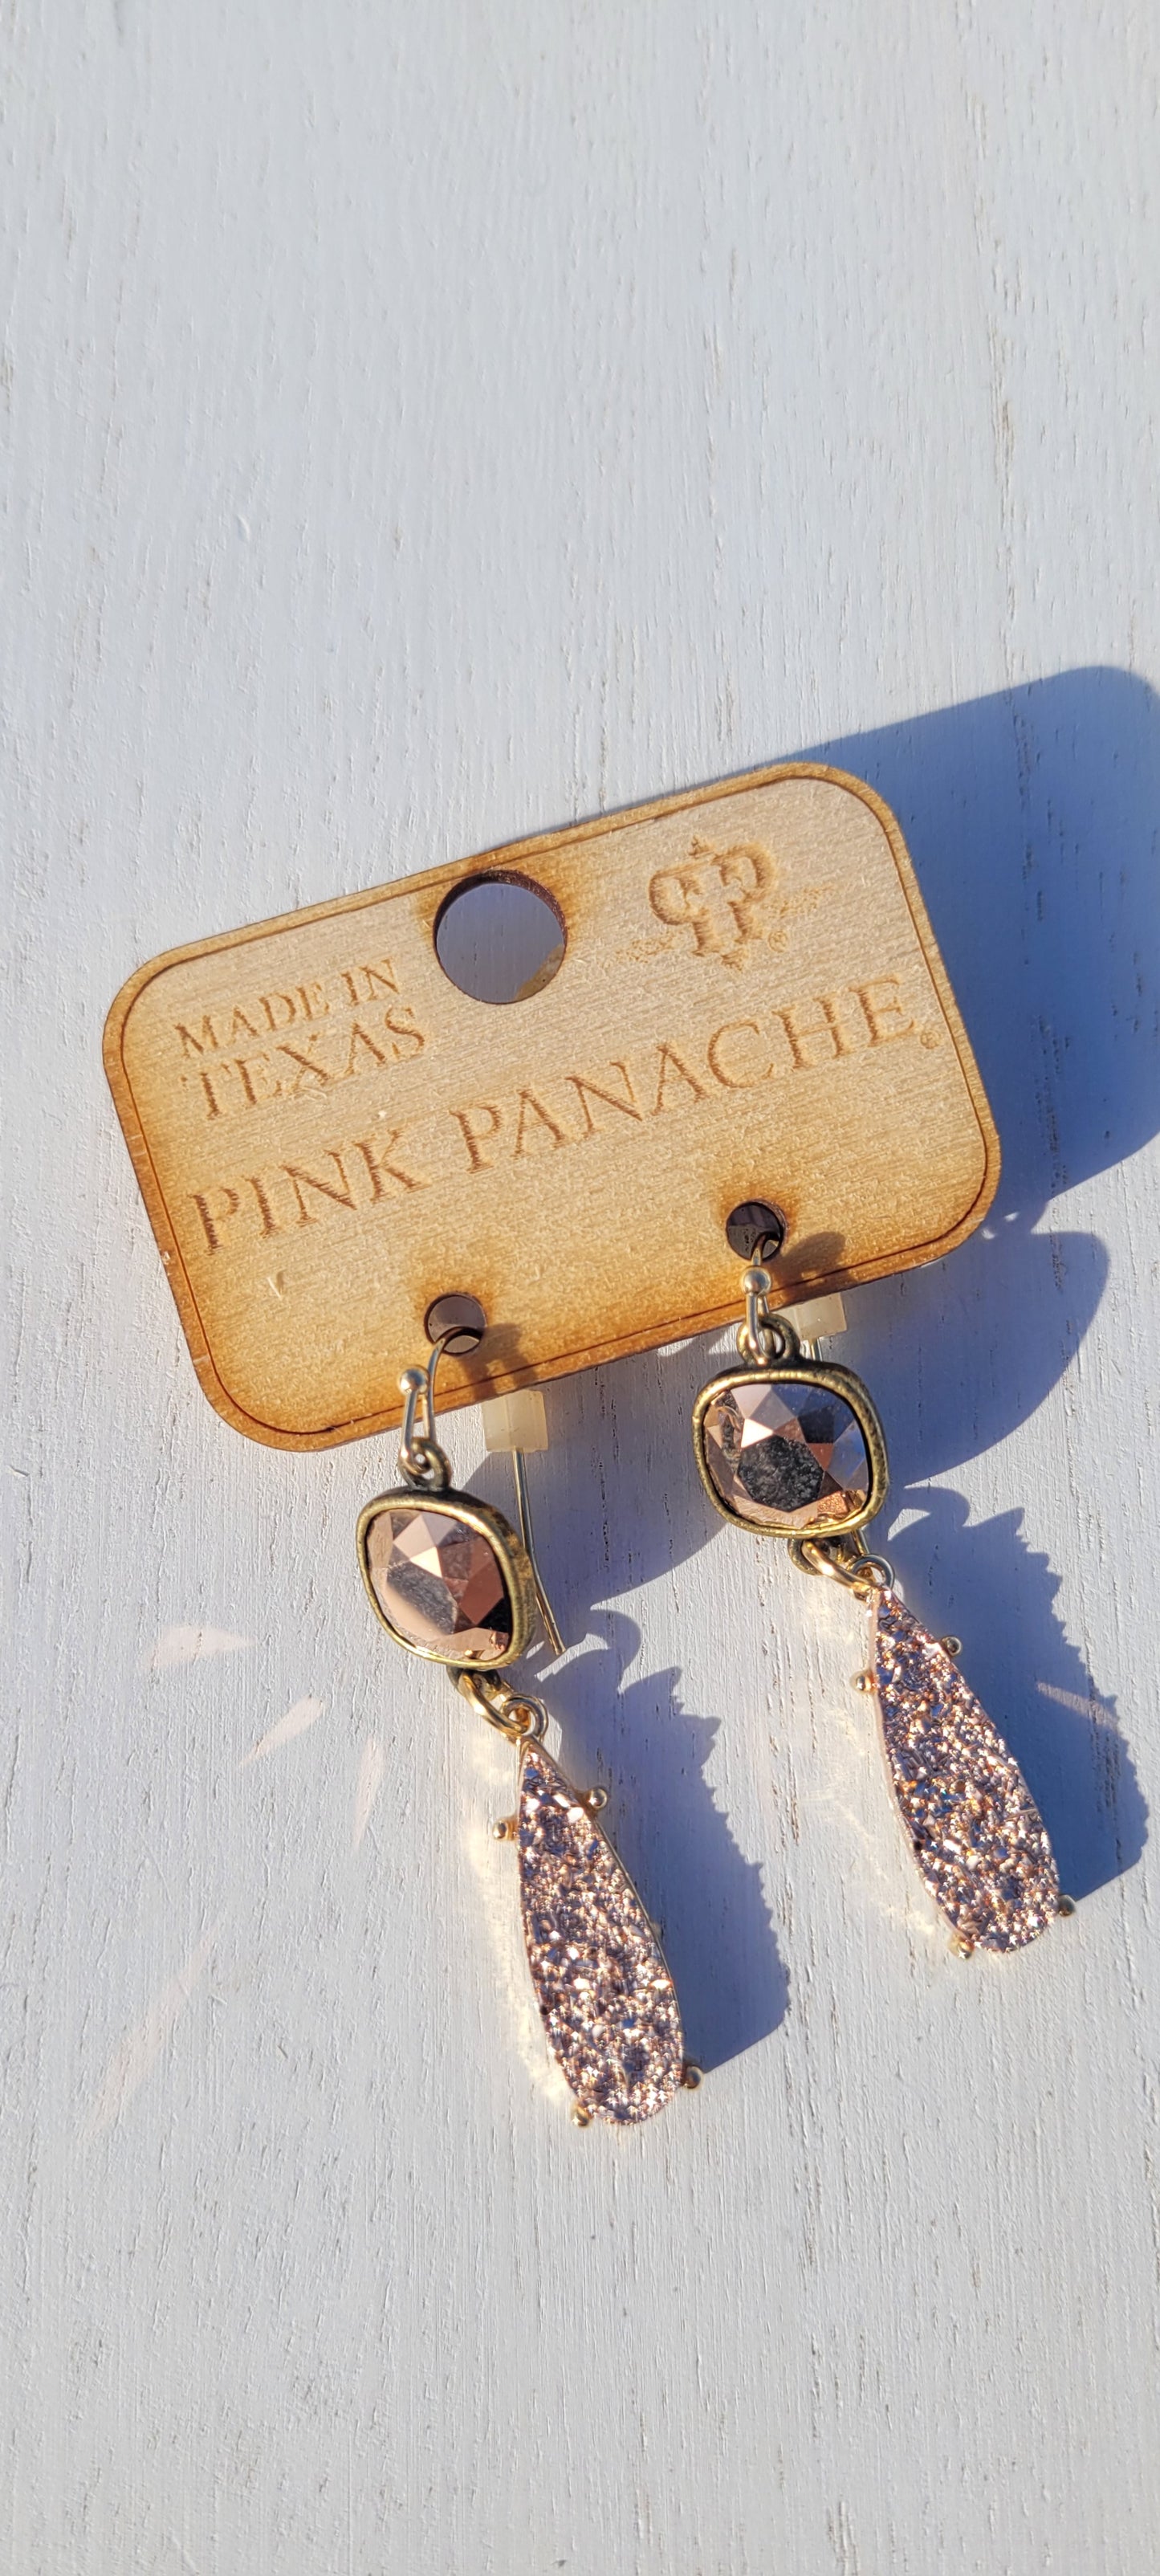 Pink Panache Earrings Color: 10mm bronze/rose gold cushion cut connector with rose gold druzy teardrop on french wire earrings Limited supply!